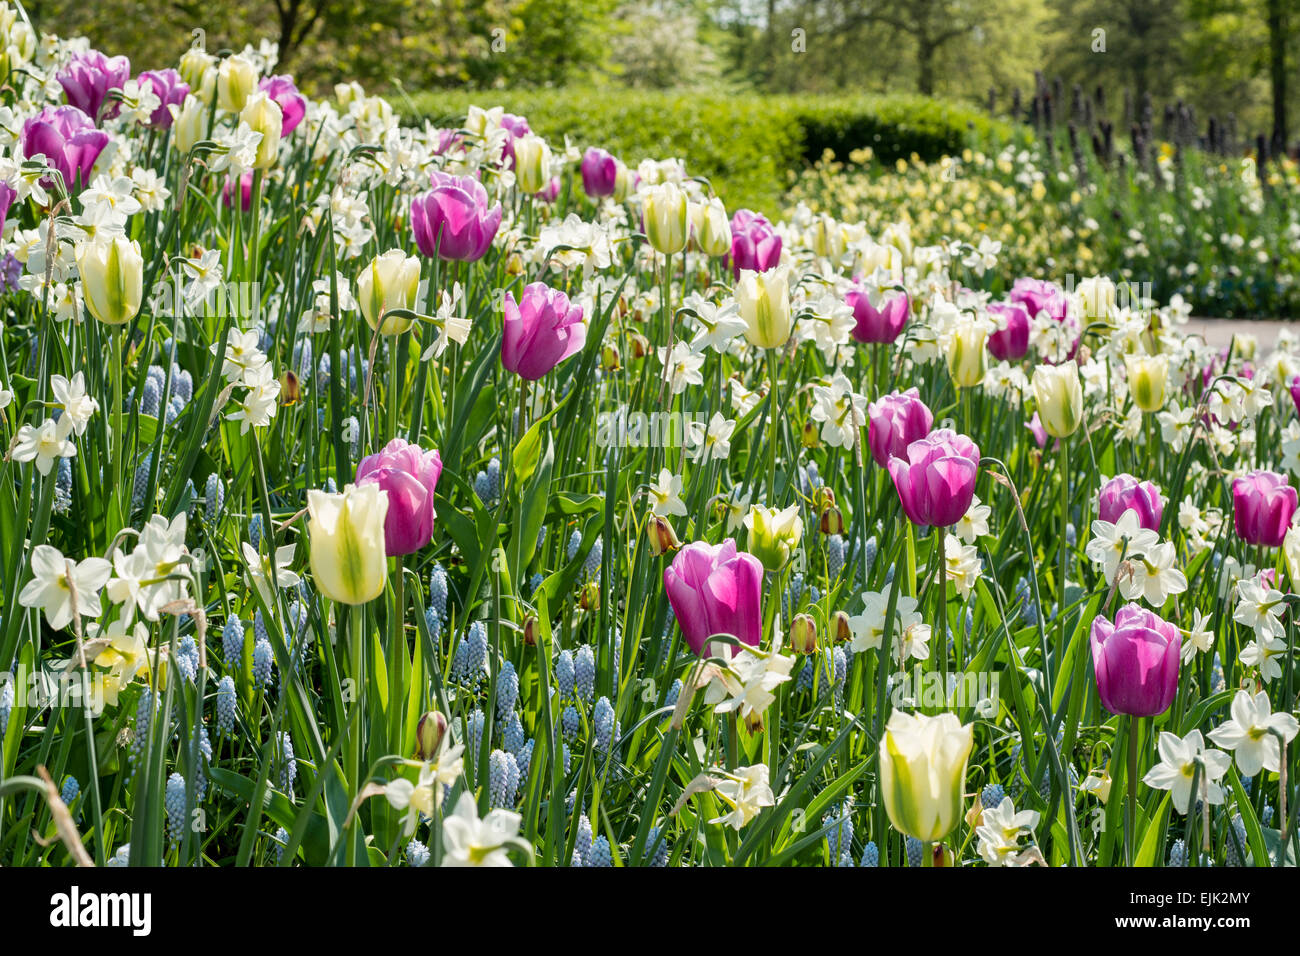 Spring flower bed with pink, magenta and white tulips (Tulipa) and white narcissus in a park Stock Photo